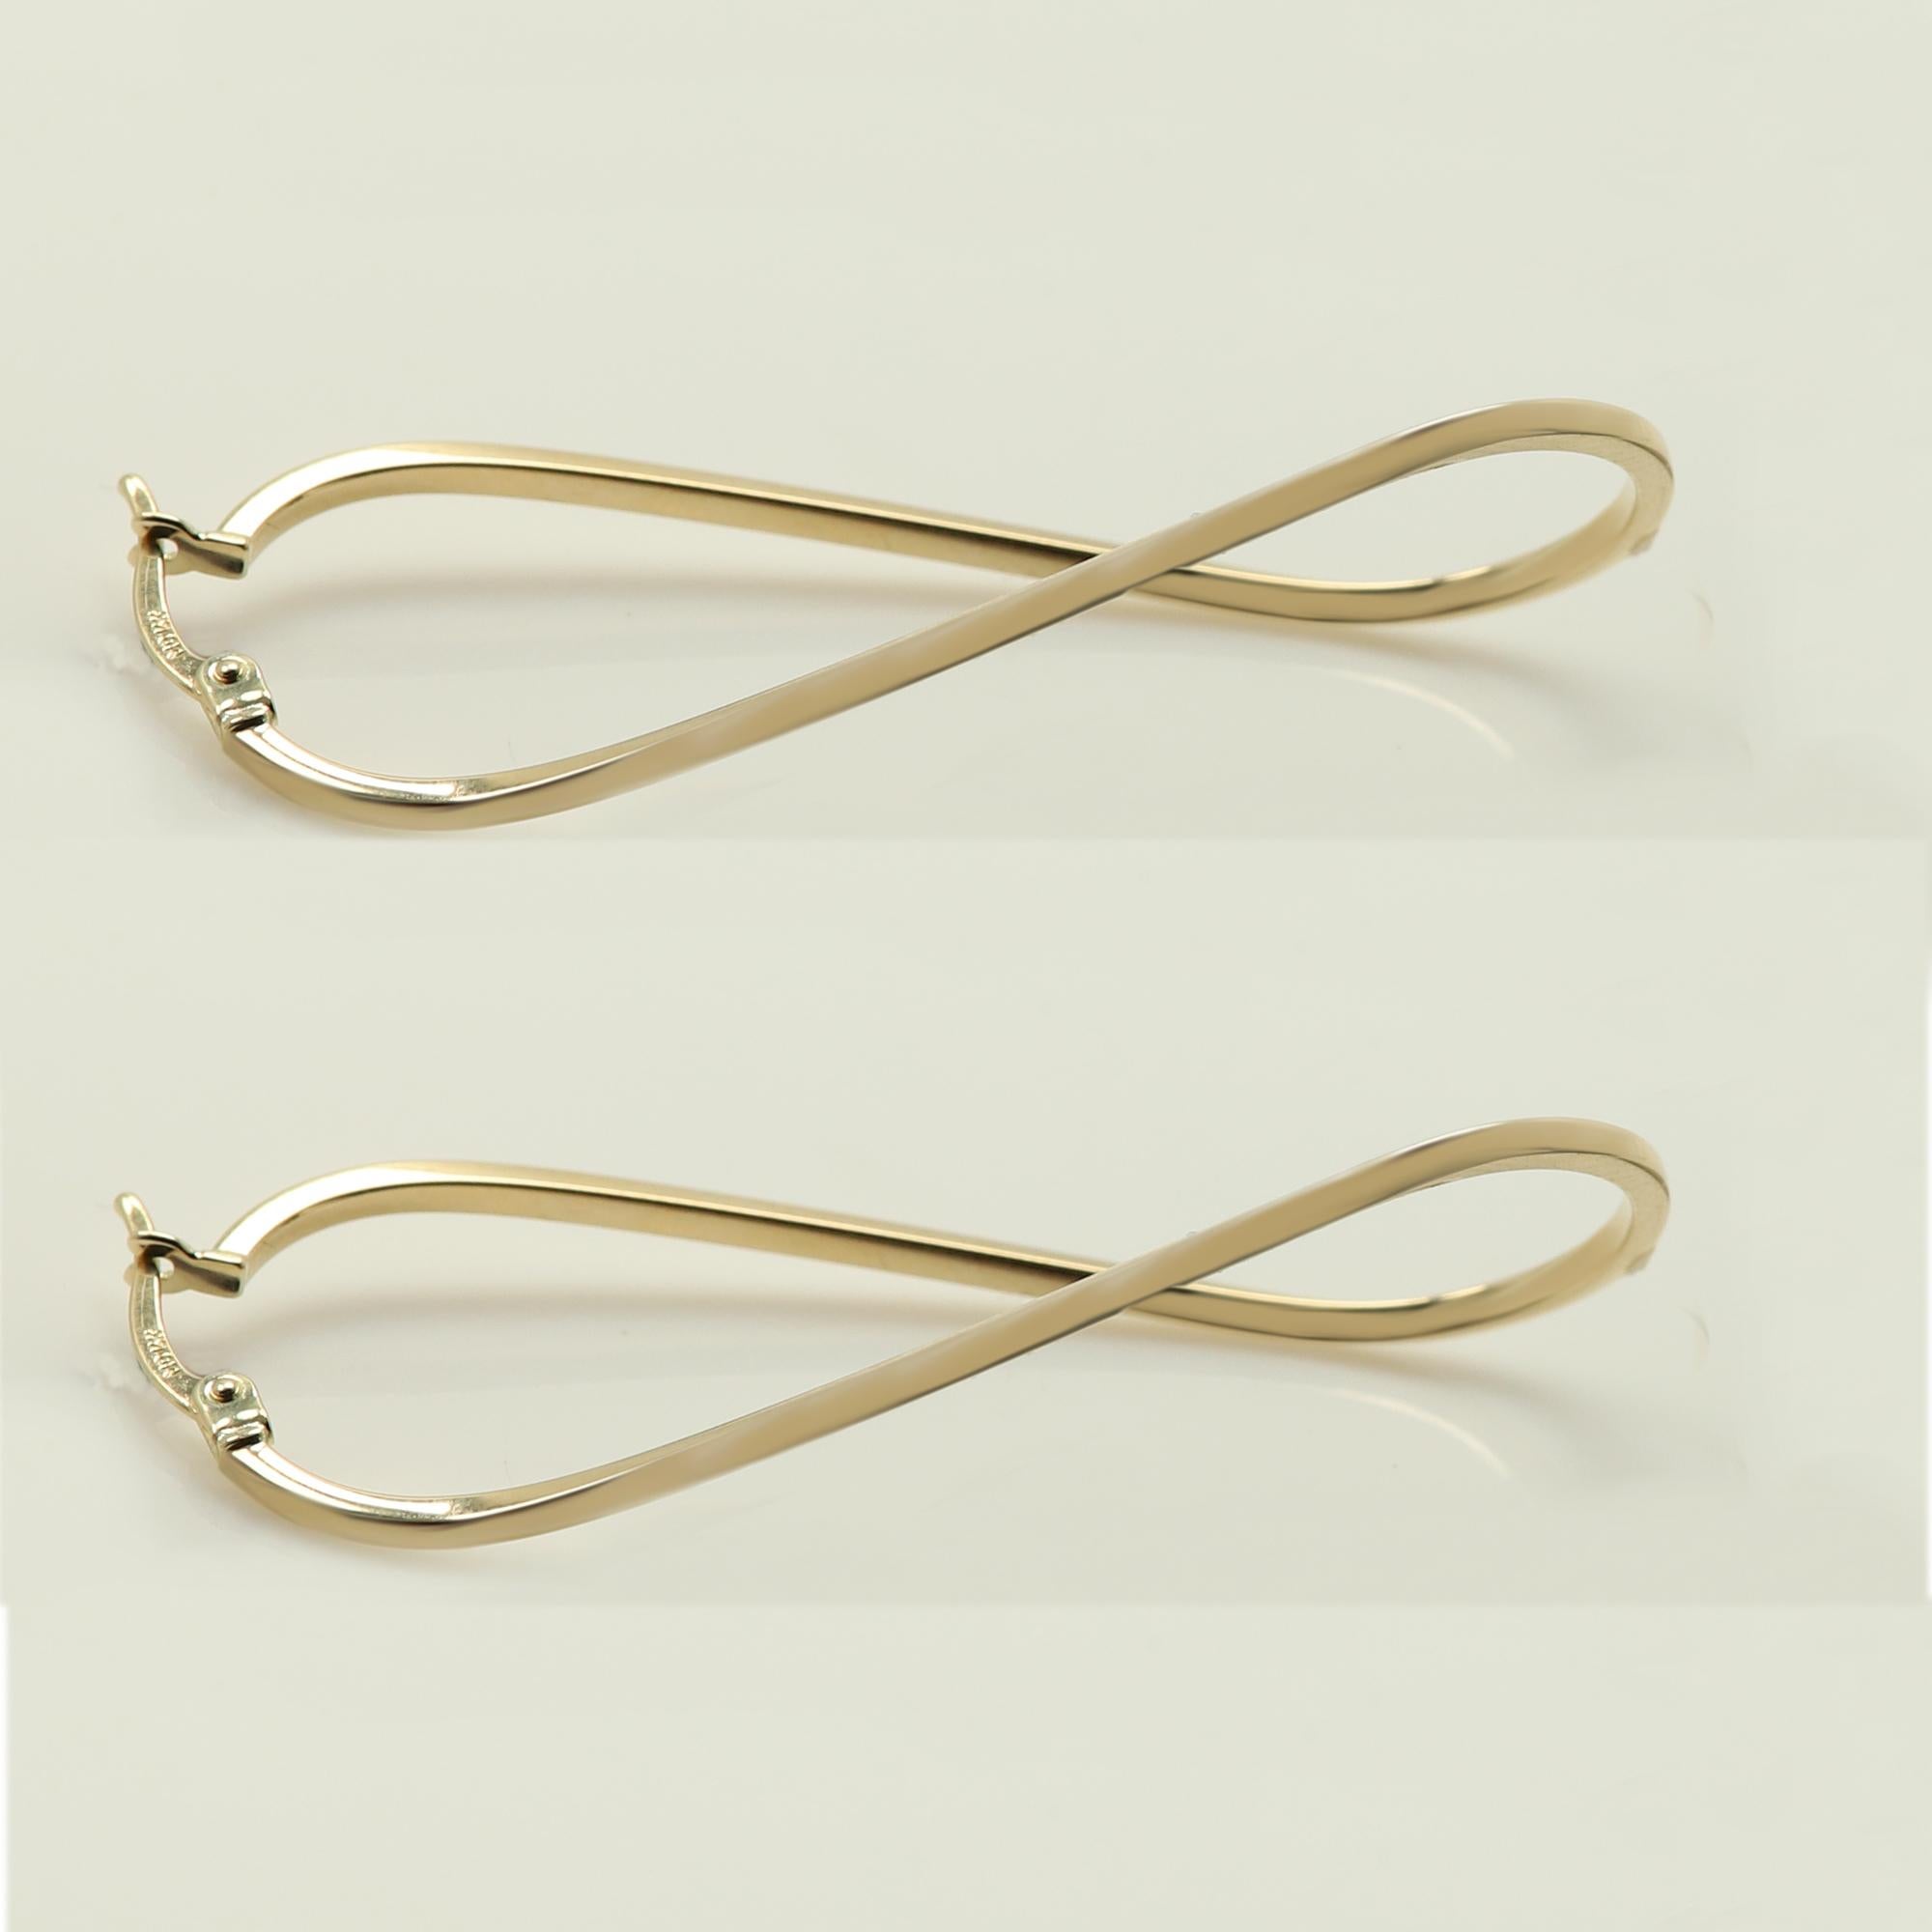 Made in Italy
Popular trendy Gold Hoops 
Swirl Shape - modern look.
weight is 2.13 grams total.
14k Yellow Gold.
approx size: 2' Inch long x 0.75' inch 
Standard Latch Back.
+Gift Box
(#2.13gr)